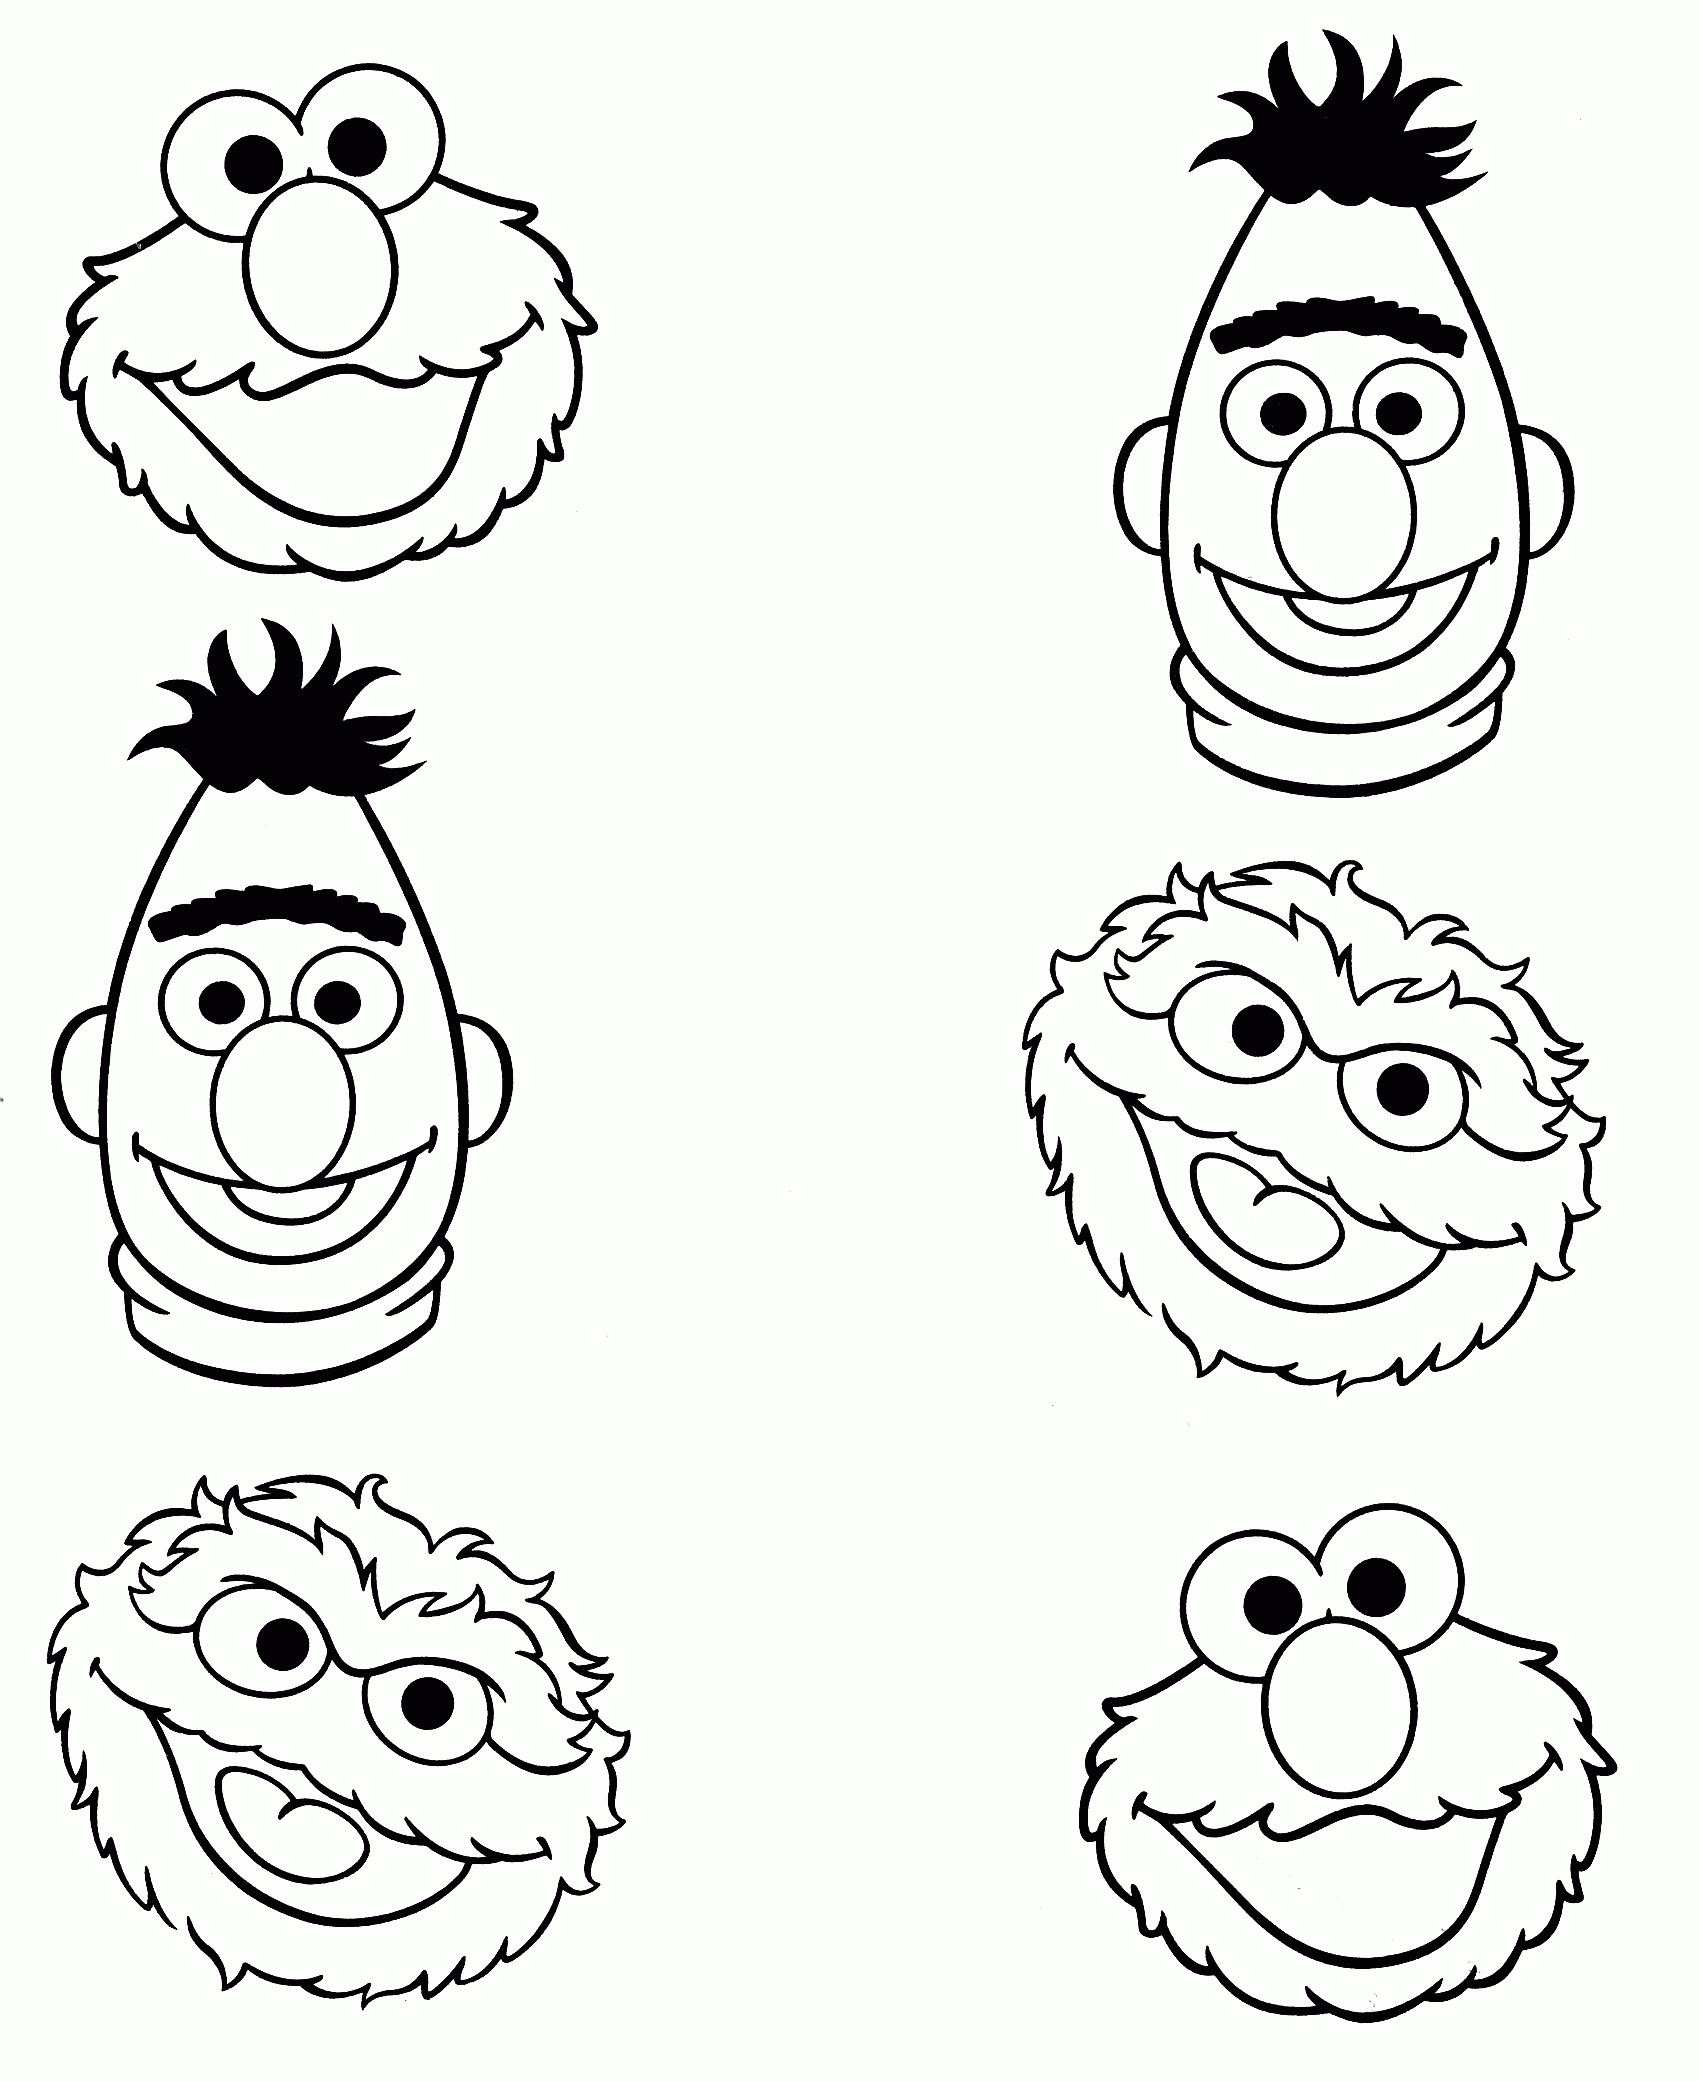 Match The Sesame Street Characters Worksheet